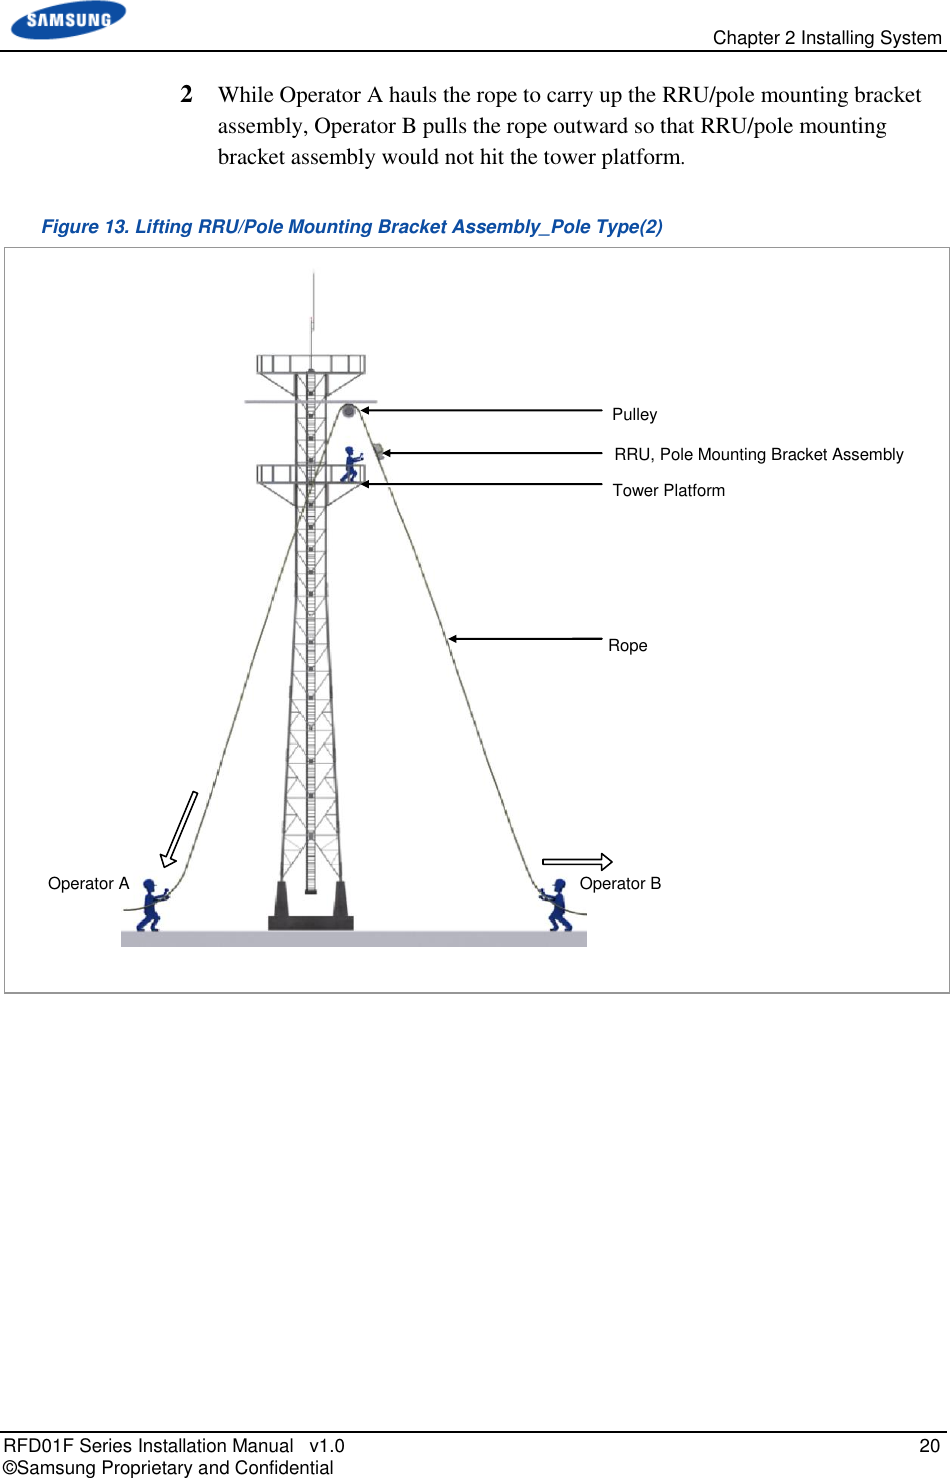   Chapter 2 Installing System RFD01F Series Installation Manual   v1.0   20 © Samsung Proprietary and Confidential 2  While Operator A hauls the rope to carry up the RRU/pole mounting bracket assembly, Operator B pulls the rope outward so that RRU/pole mounting bracket assembly would not hit the tower platform. Figure 13. Lifting RRU/Pole Mounting Bracket Assembly_Pole Type(2)    Pulley RRU, Pole Mounting Bracket Assembly Tower Platform Rope Operator A Operator B 